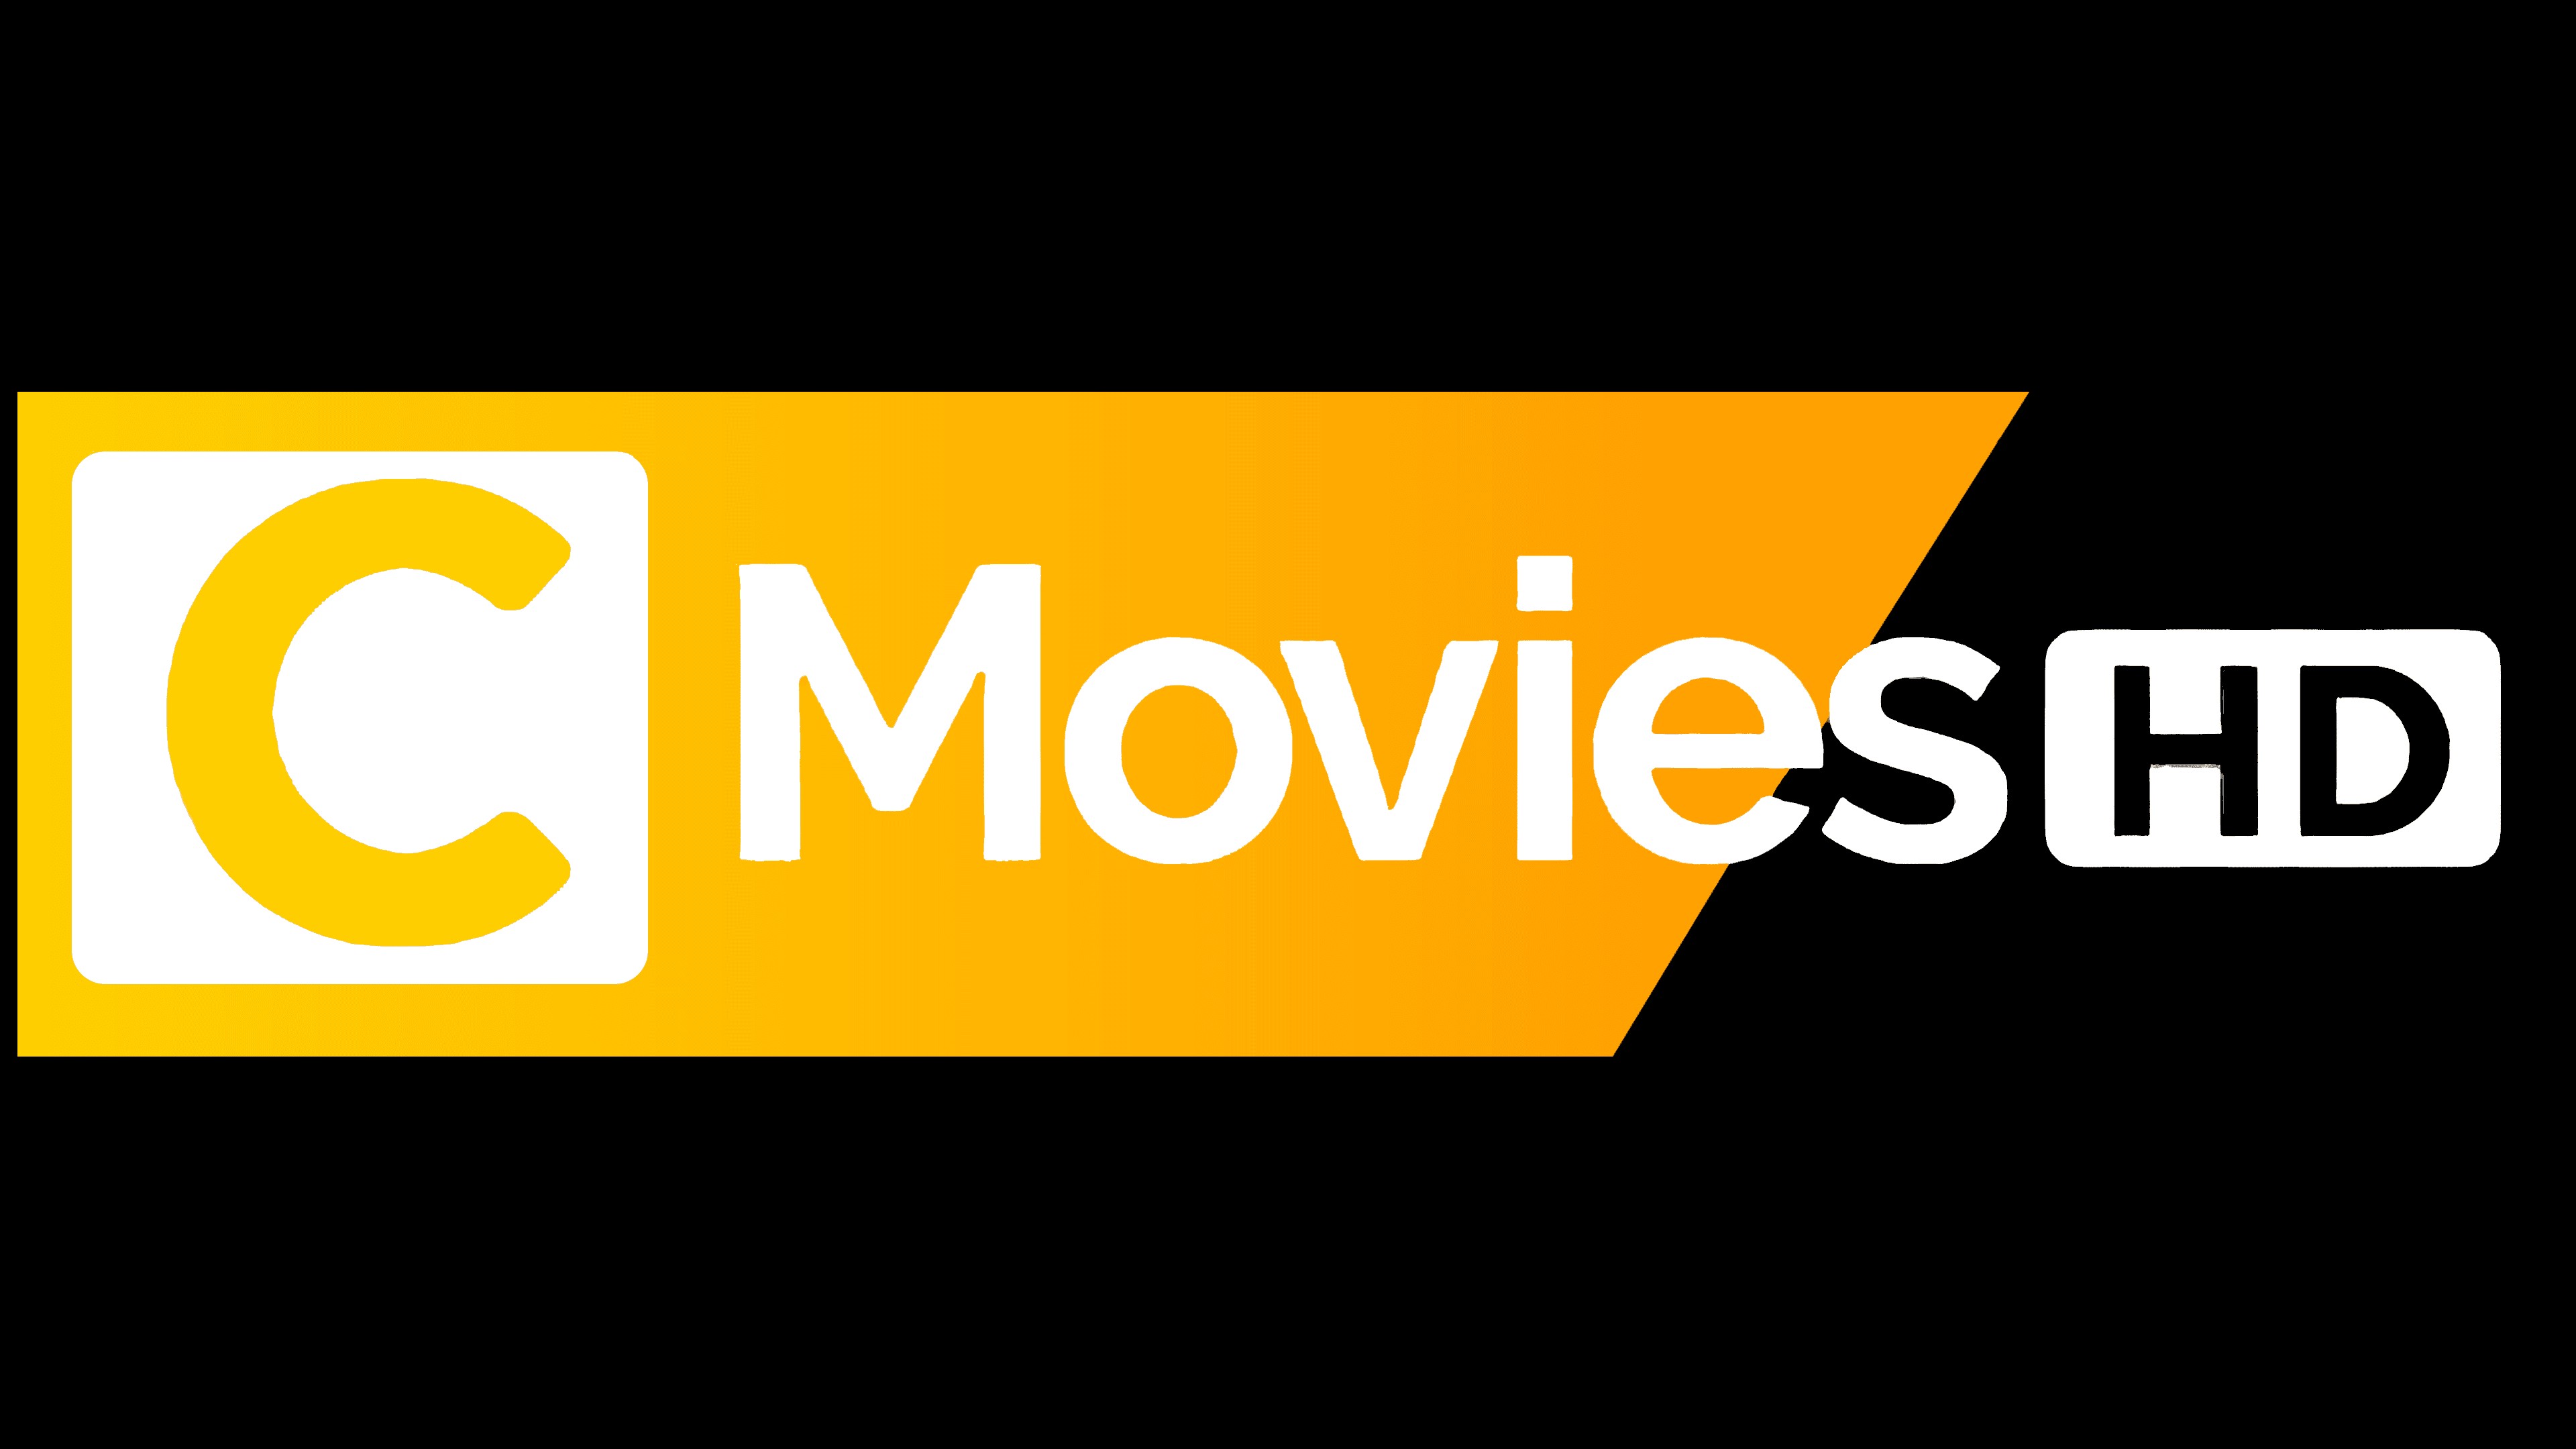 Everything about Cmovies: Features, Functions & Safety